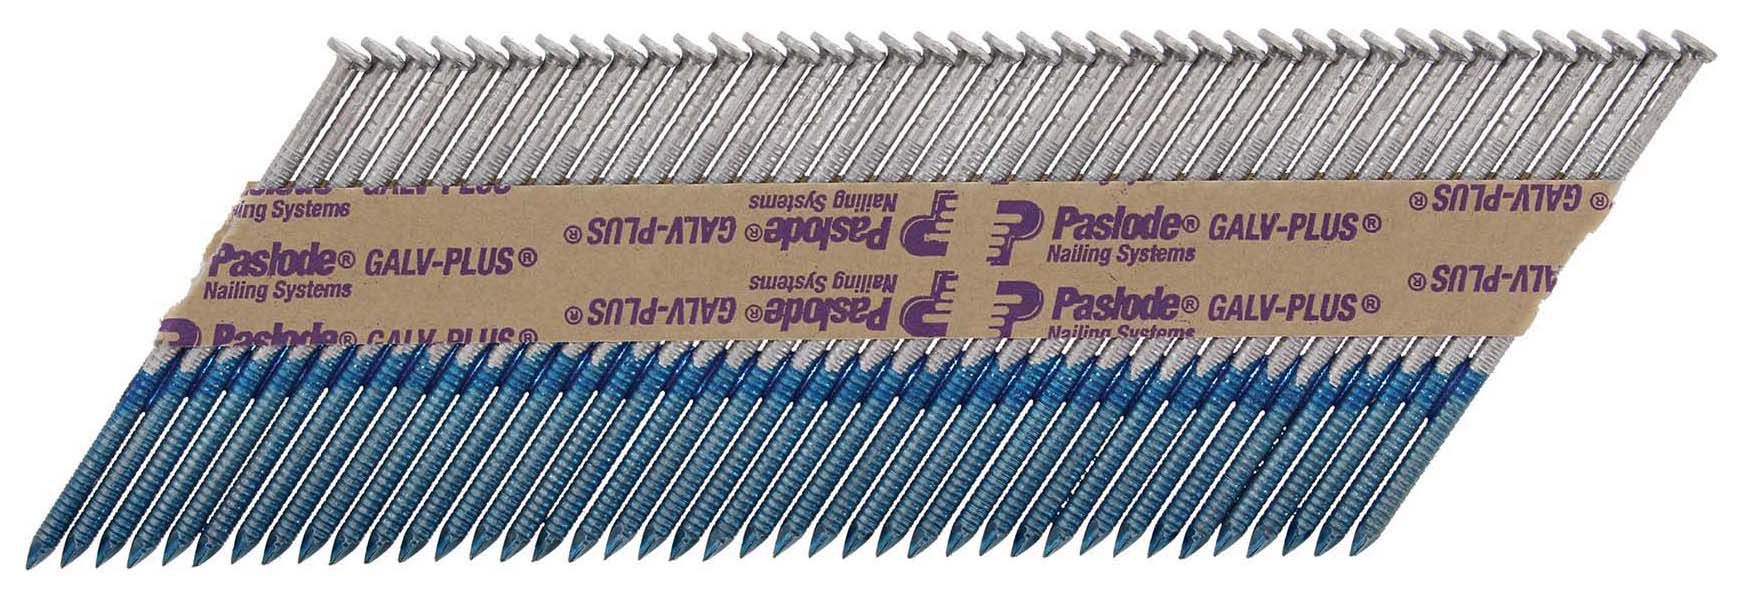 Paslode 360Xi 2.8mm x 51mm Galv-Plus Collated Nails + 1 Fuel Cell - Box of 1100